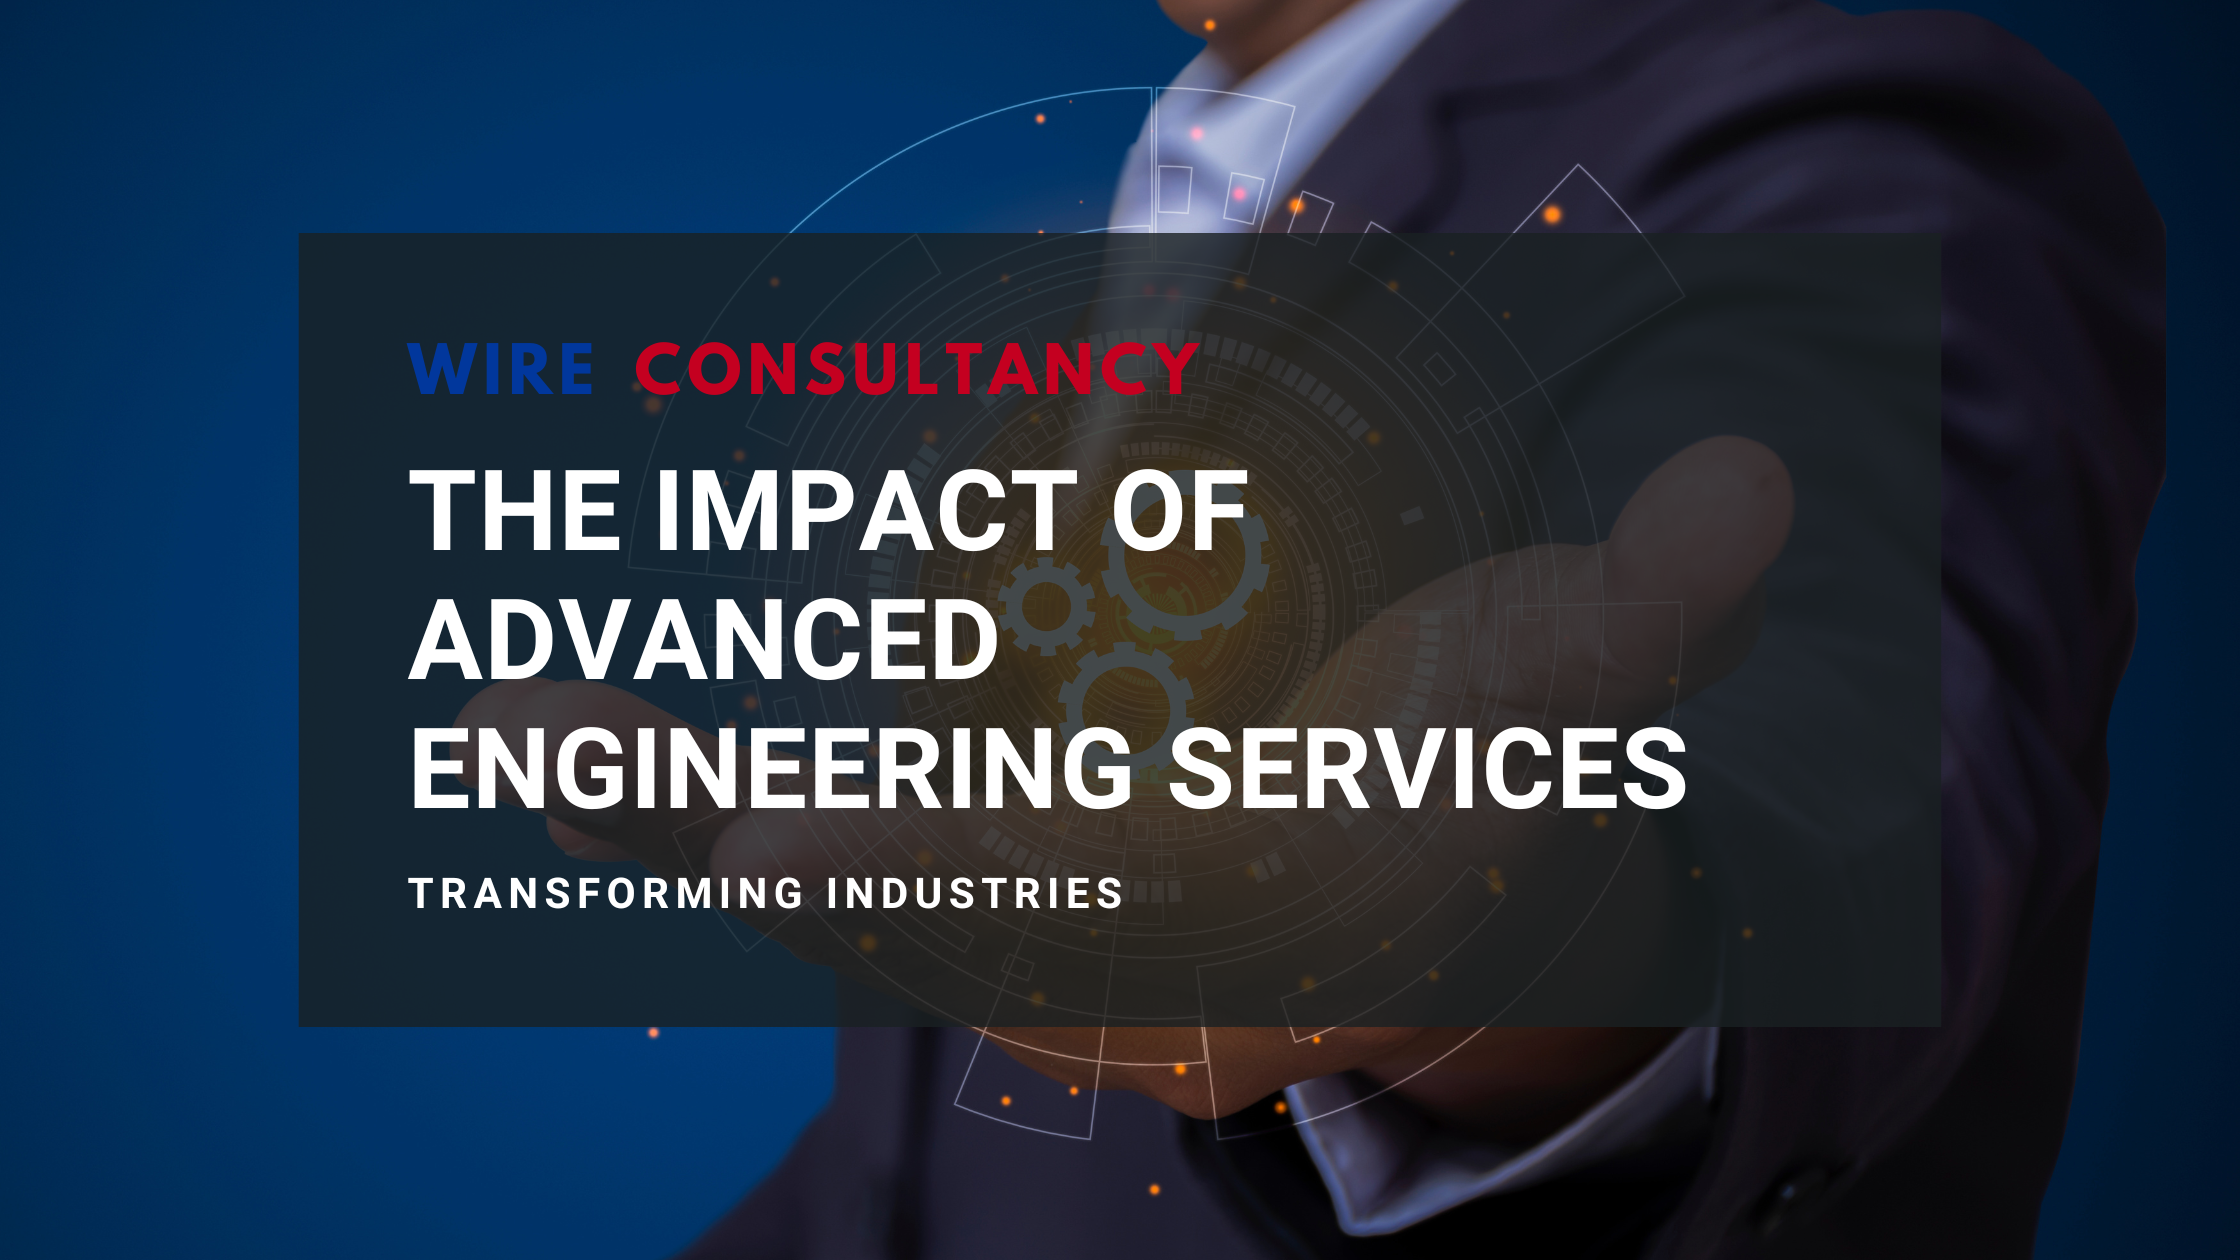 Transforming Industries: The Impact of Advanced Engineering Services